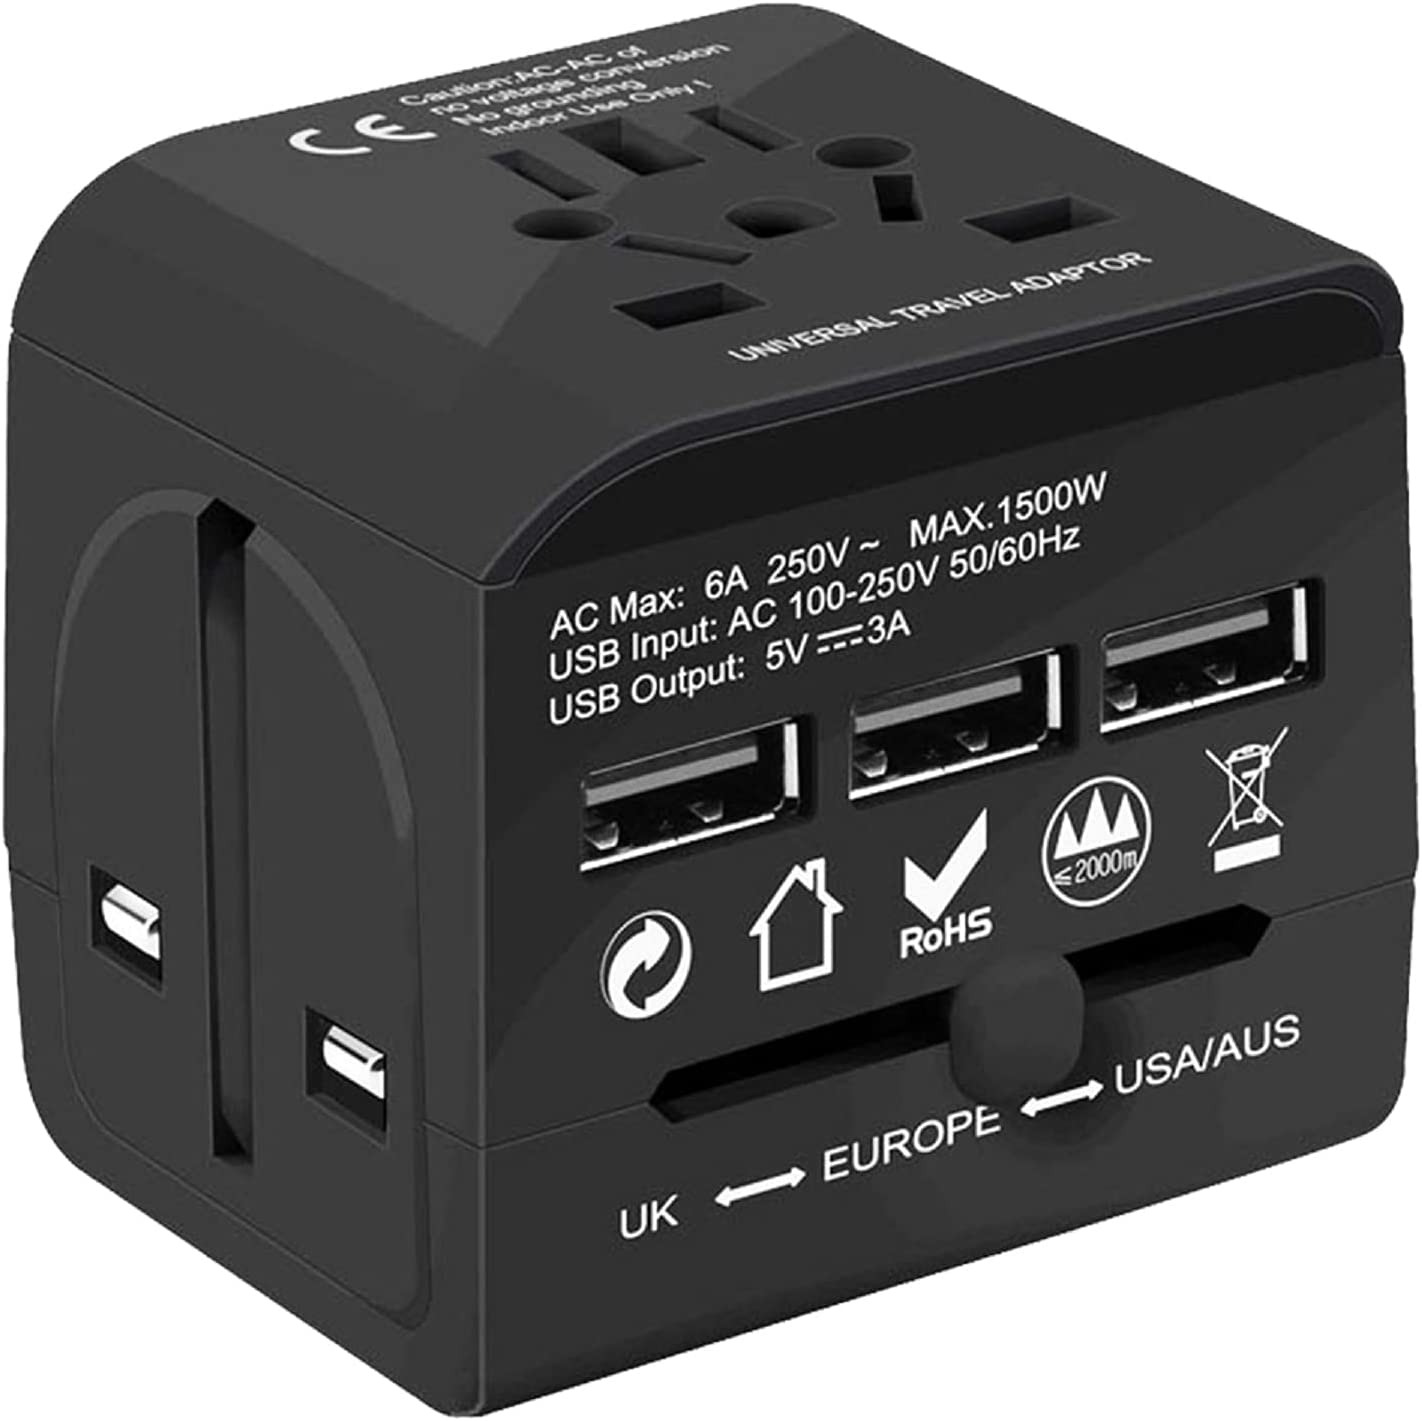 Charger Universal Adapter Multi Outlet Port 3 USB Phone Power All in One Multi Cable Multiple Phone Charge Wall Plug (Black) Kcubeinc UTA 3USB BLK